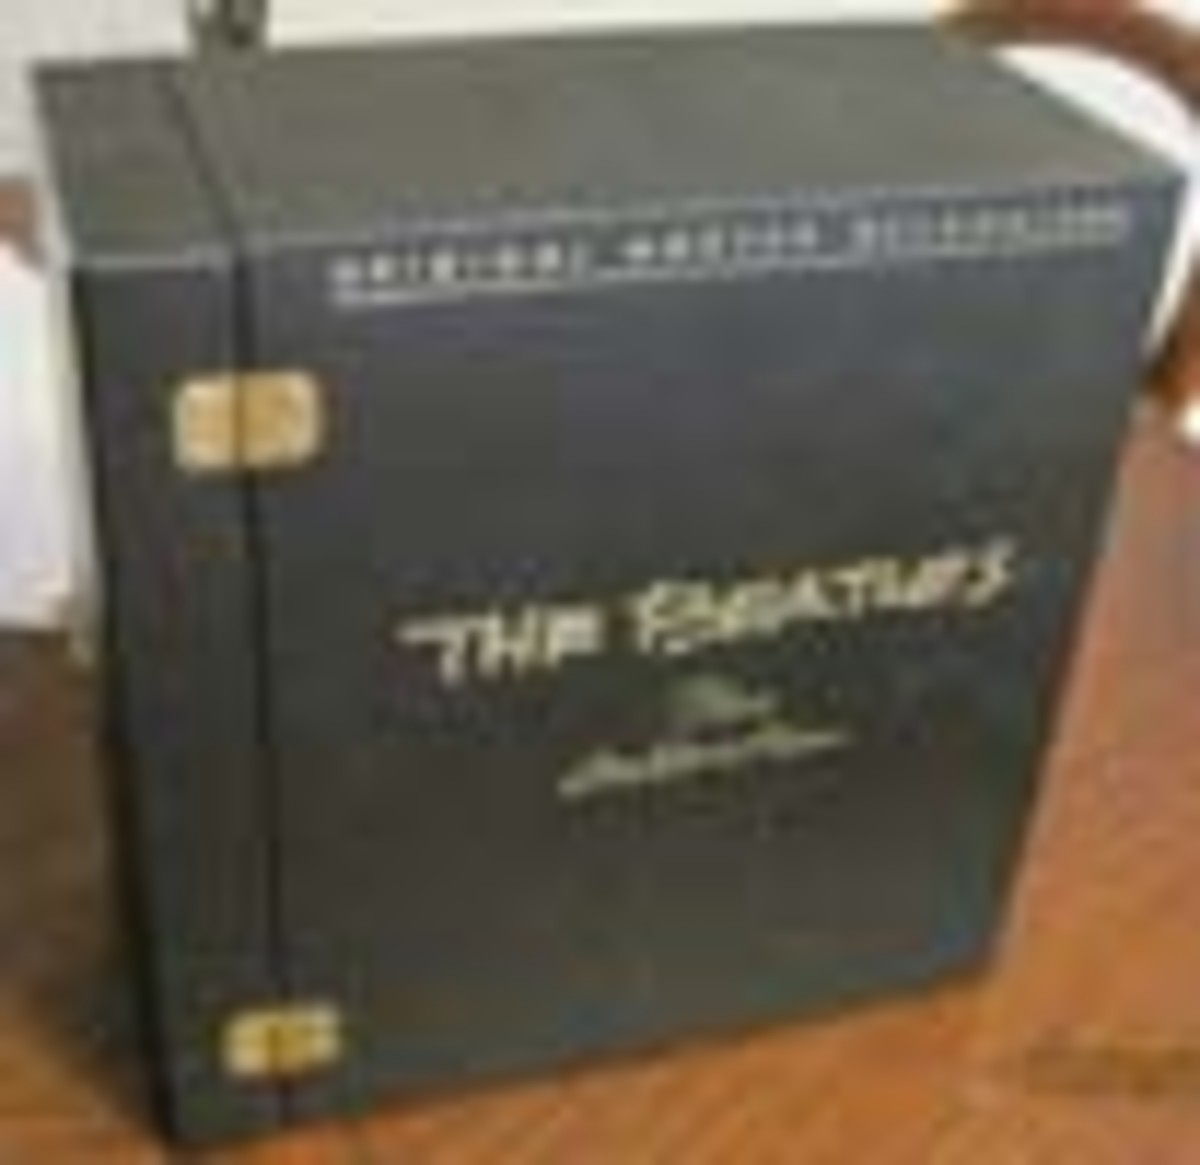 The Beatles Mobile Fidelty Sound Labs box set